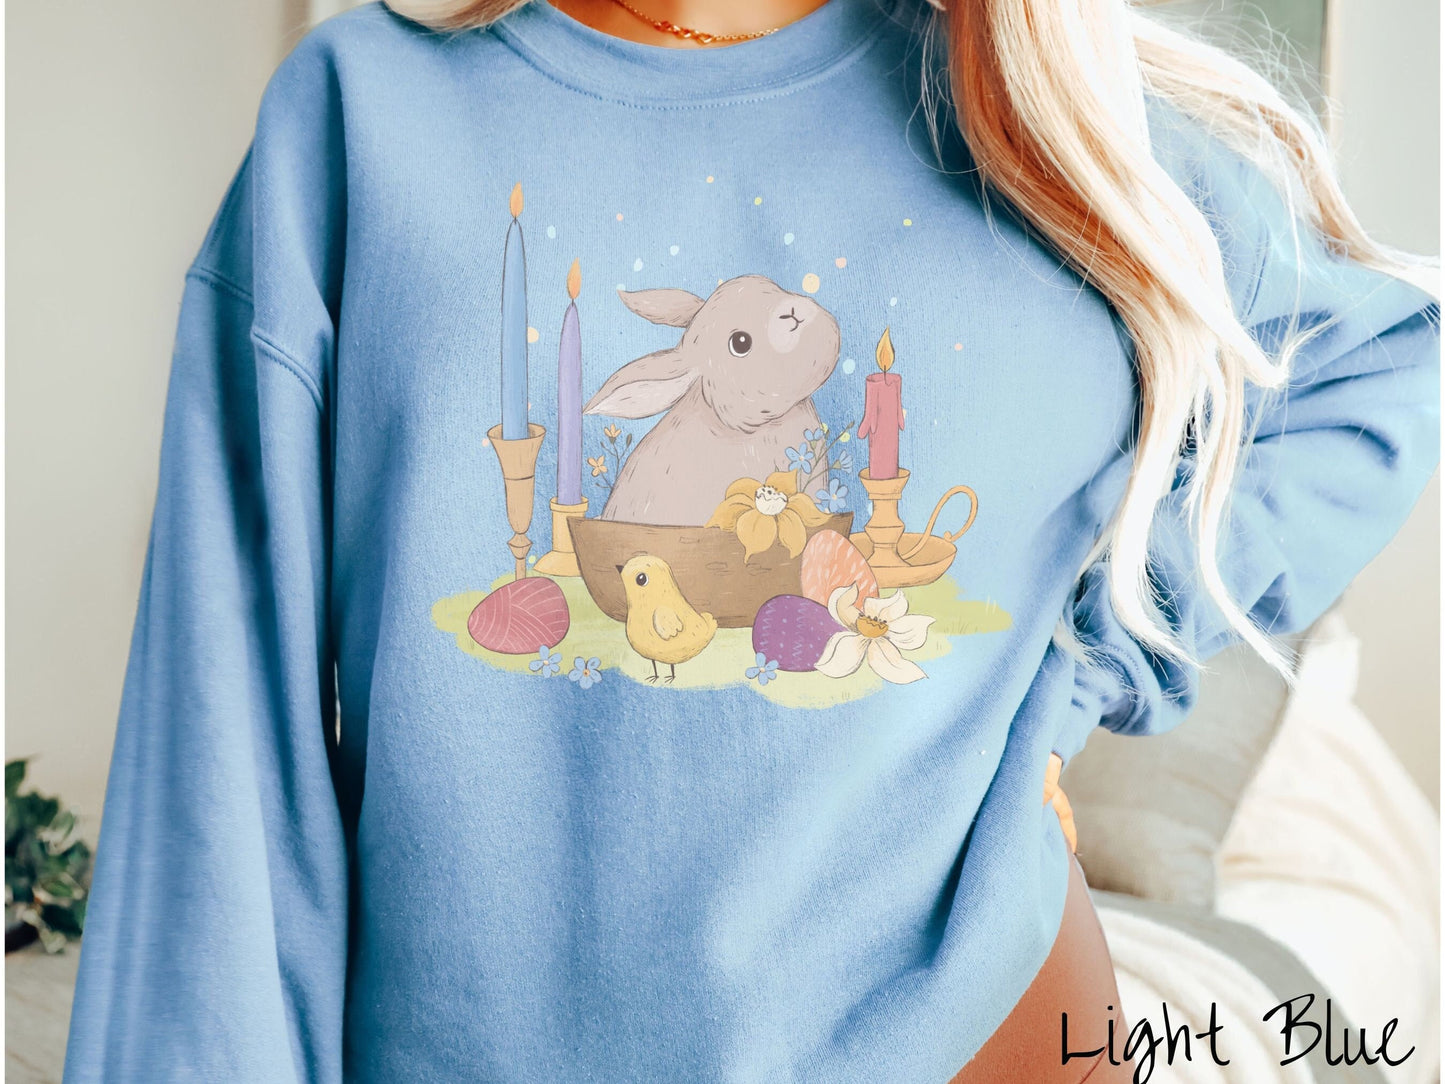 A woman wearing a cute, vintage light blue colored sweatshirt with a gray bunny rabbit sitting in between three lit candles, some red, orange, and purple eggs, and yellow and white flowers.